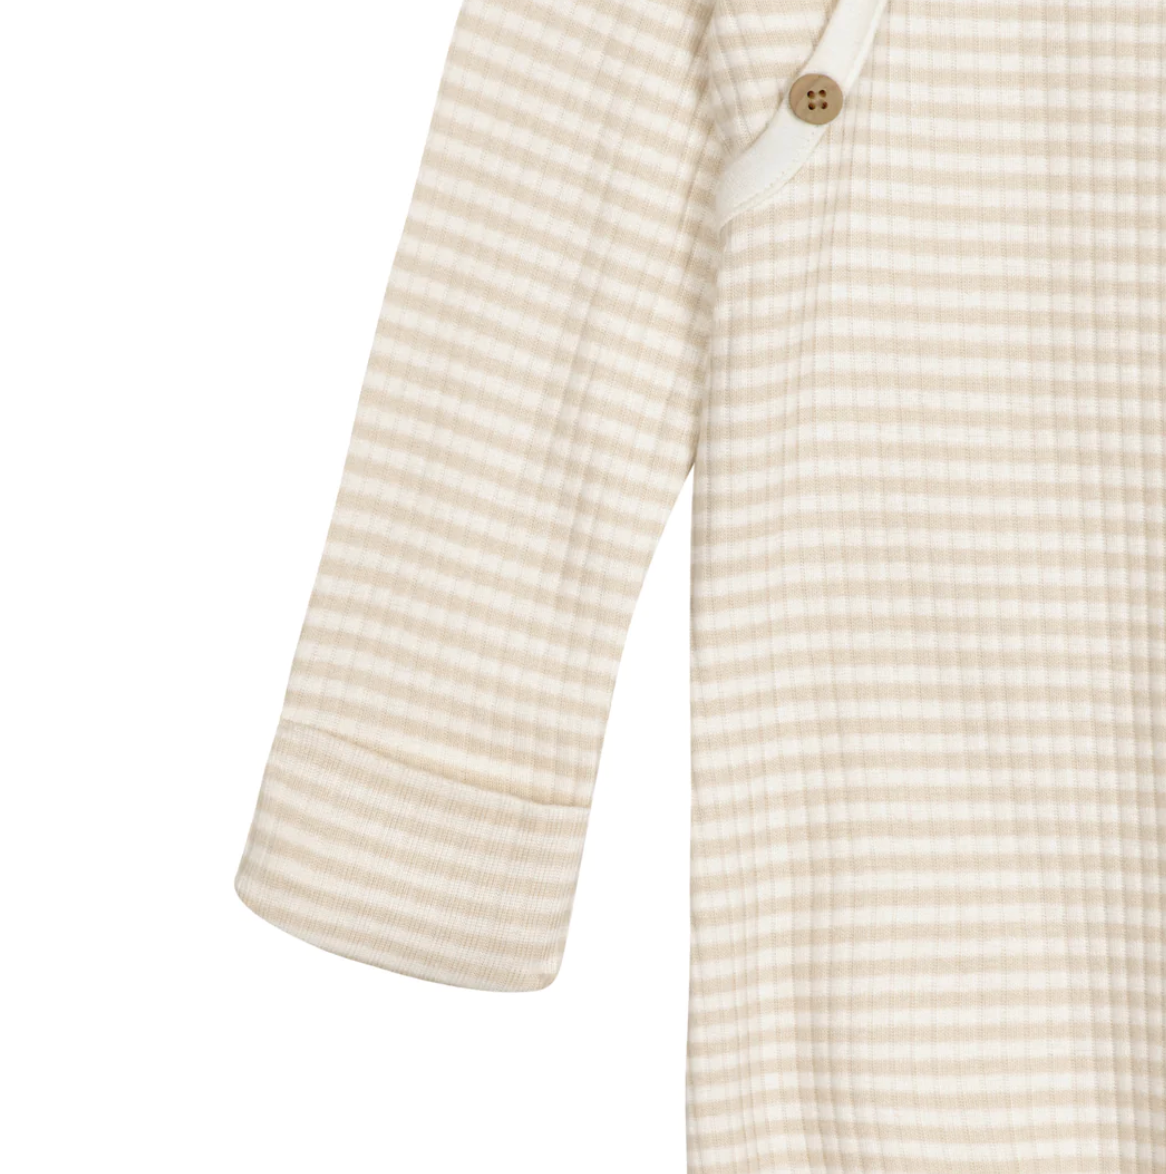 Just Born - Tan and Ivory Striped Sleeping Gown